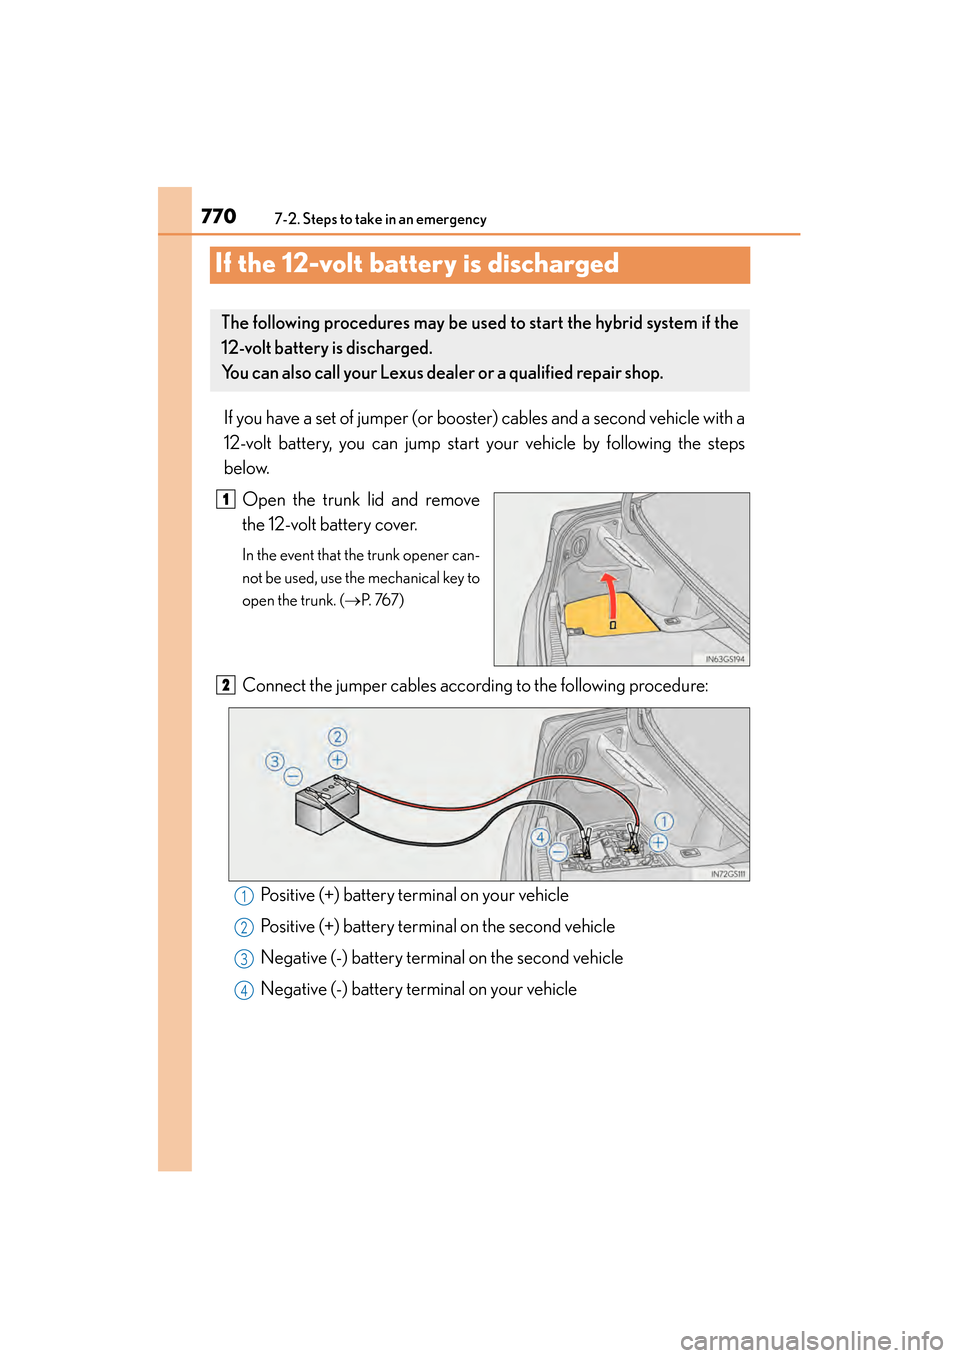 Lexus GS450h 2013  Owners Manual 770
GS450h_U (OM30D01U)
7-2. Steps to take in an emergency
If the 12-volt battery is discharged
If you have a set of jumper (or booster) cables and a second vehicle with a
12-volt battery, you can jum